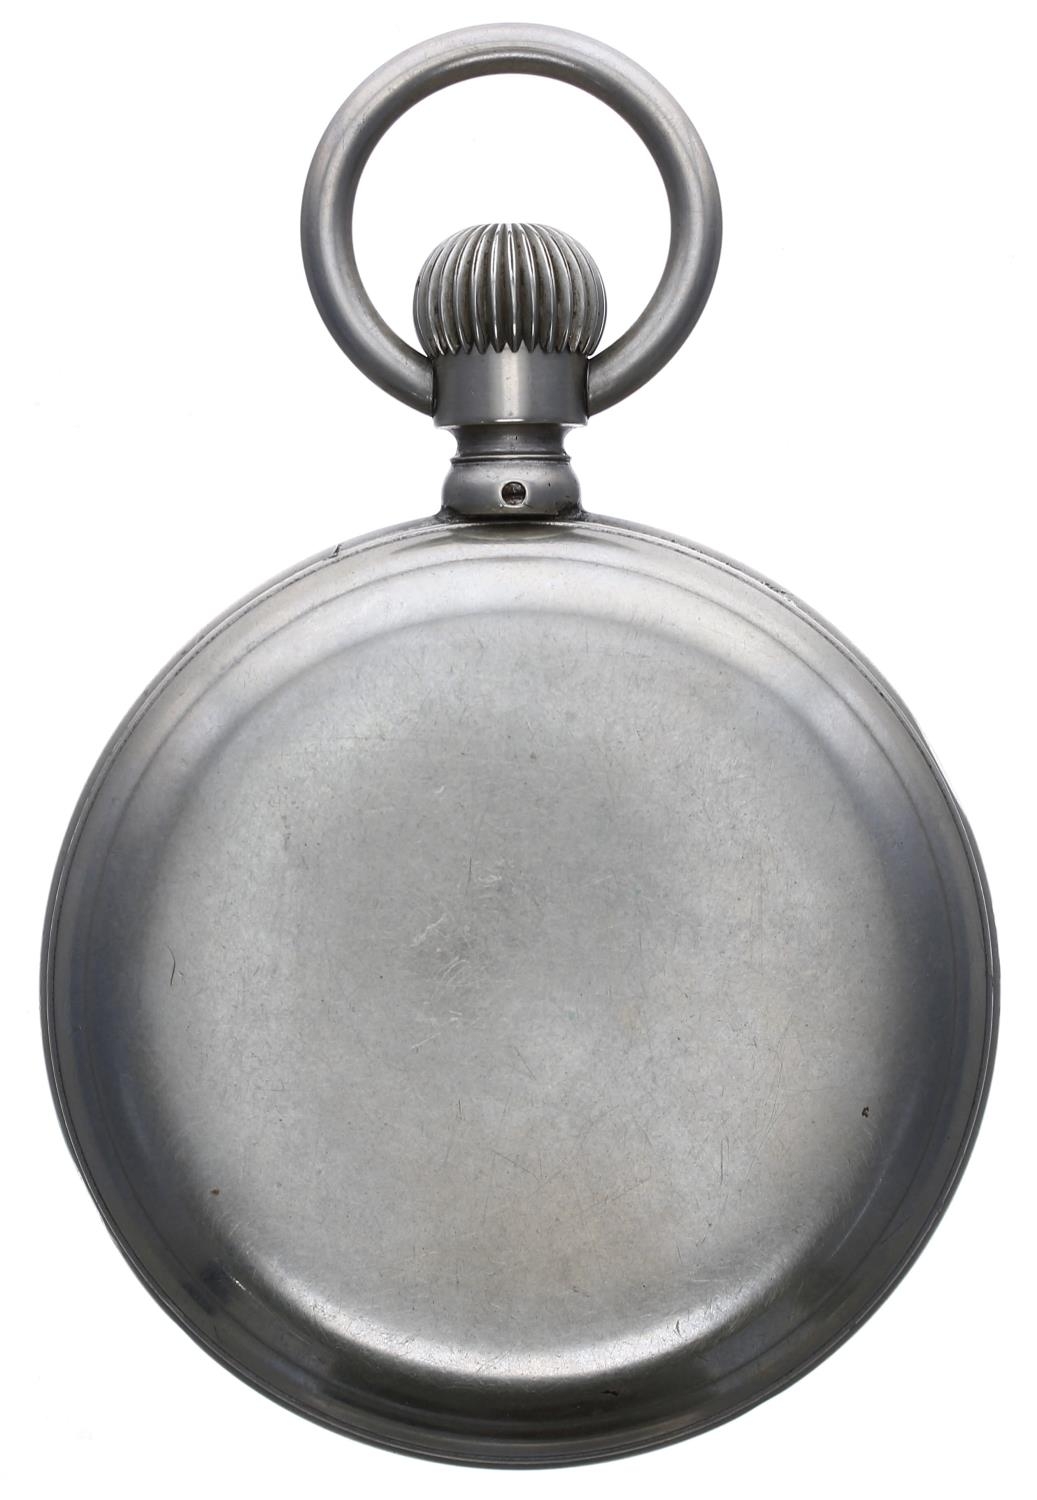 Longines Baume nickel cased Goliath pocket watch, the movement signed Longines Baume with plain - Image 4 of 7